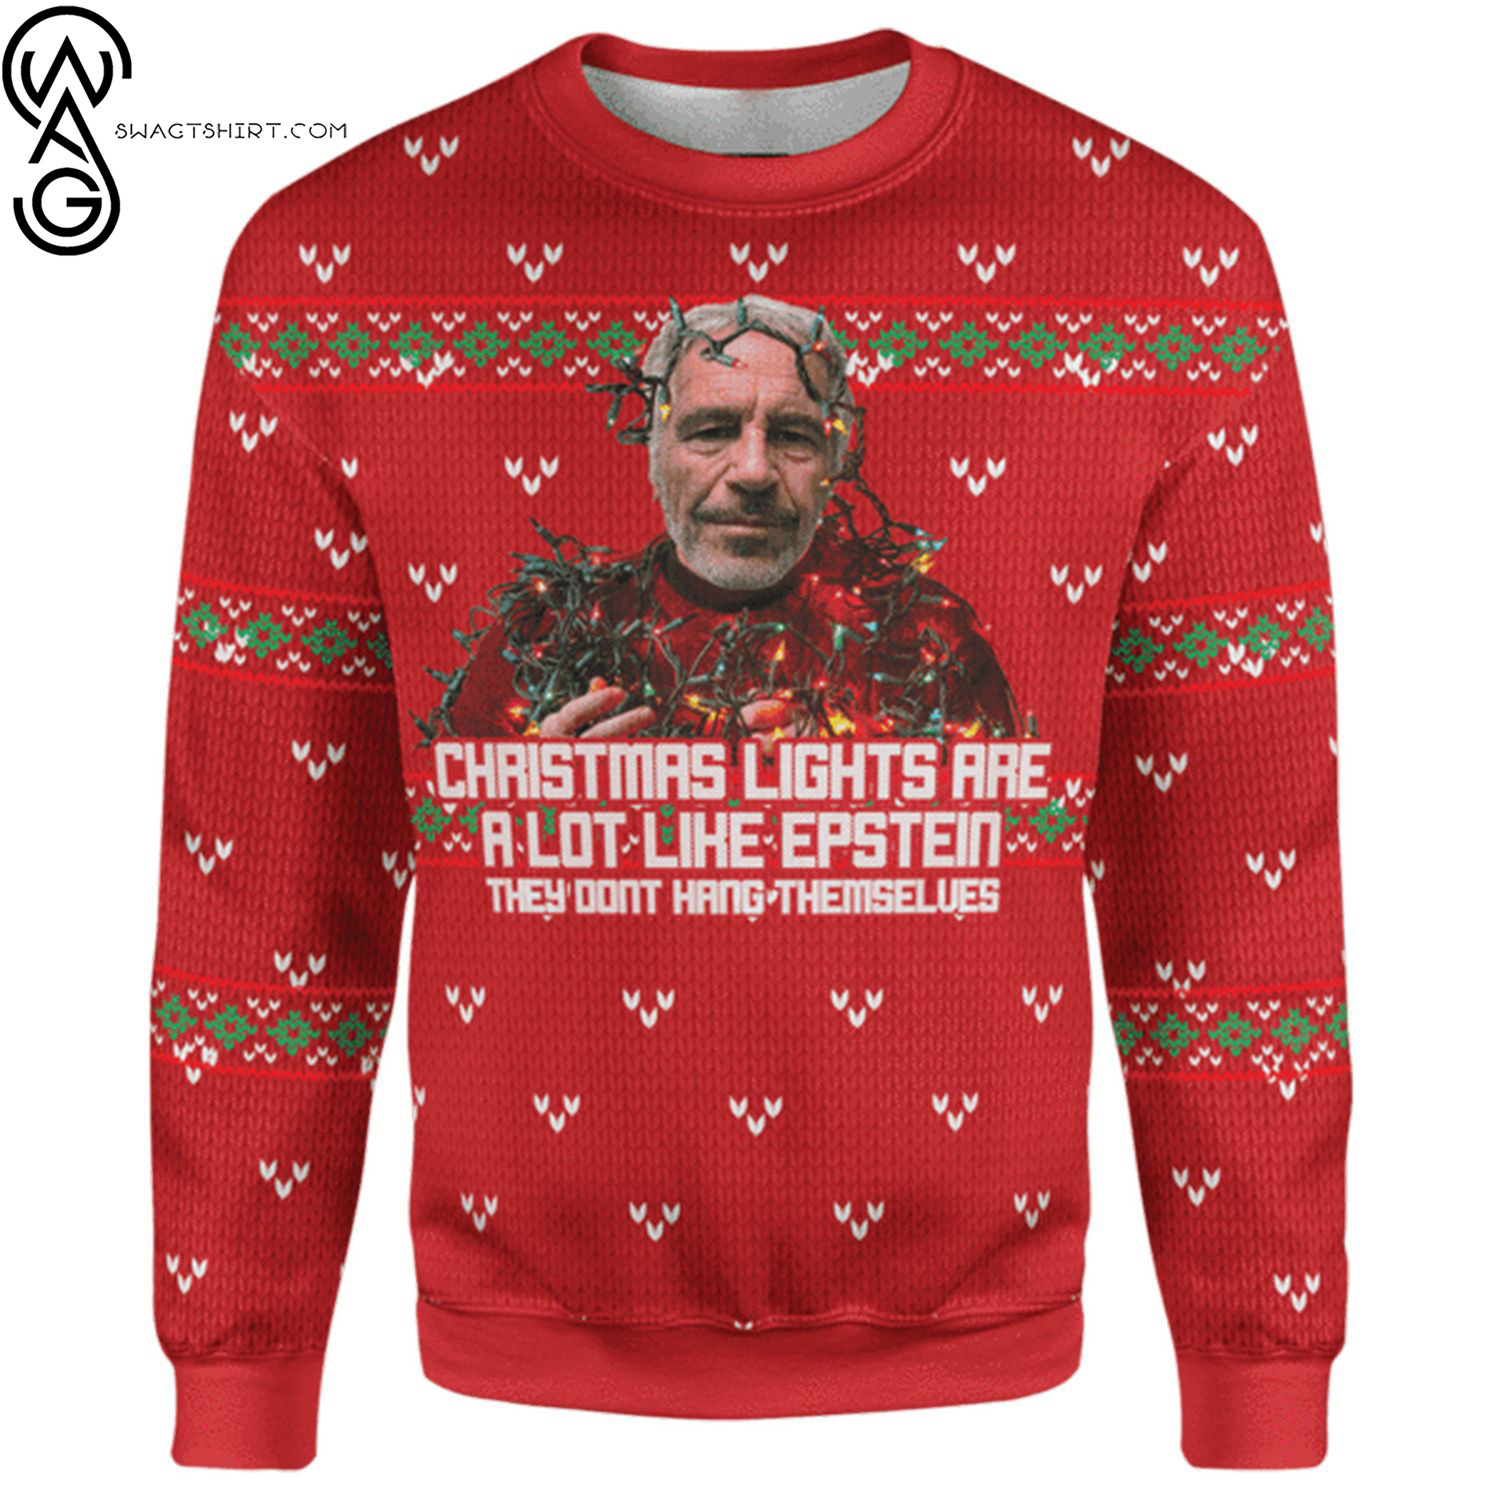 Christmas lights are a lot like epstein they don't hang themselves ugly christmas sweater